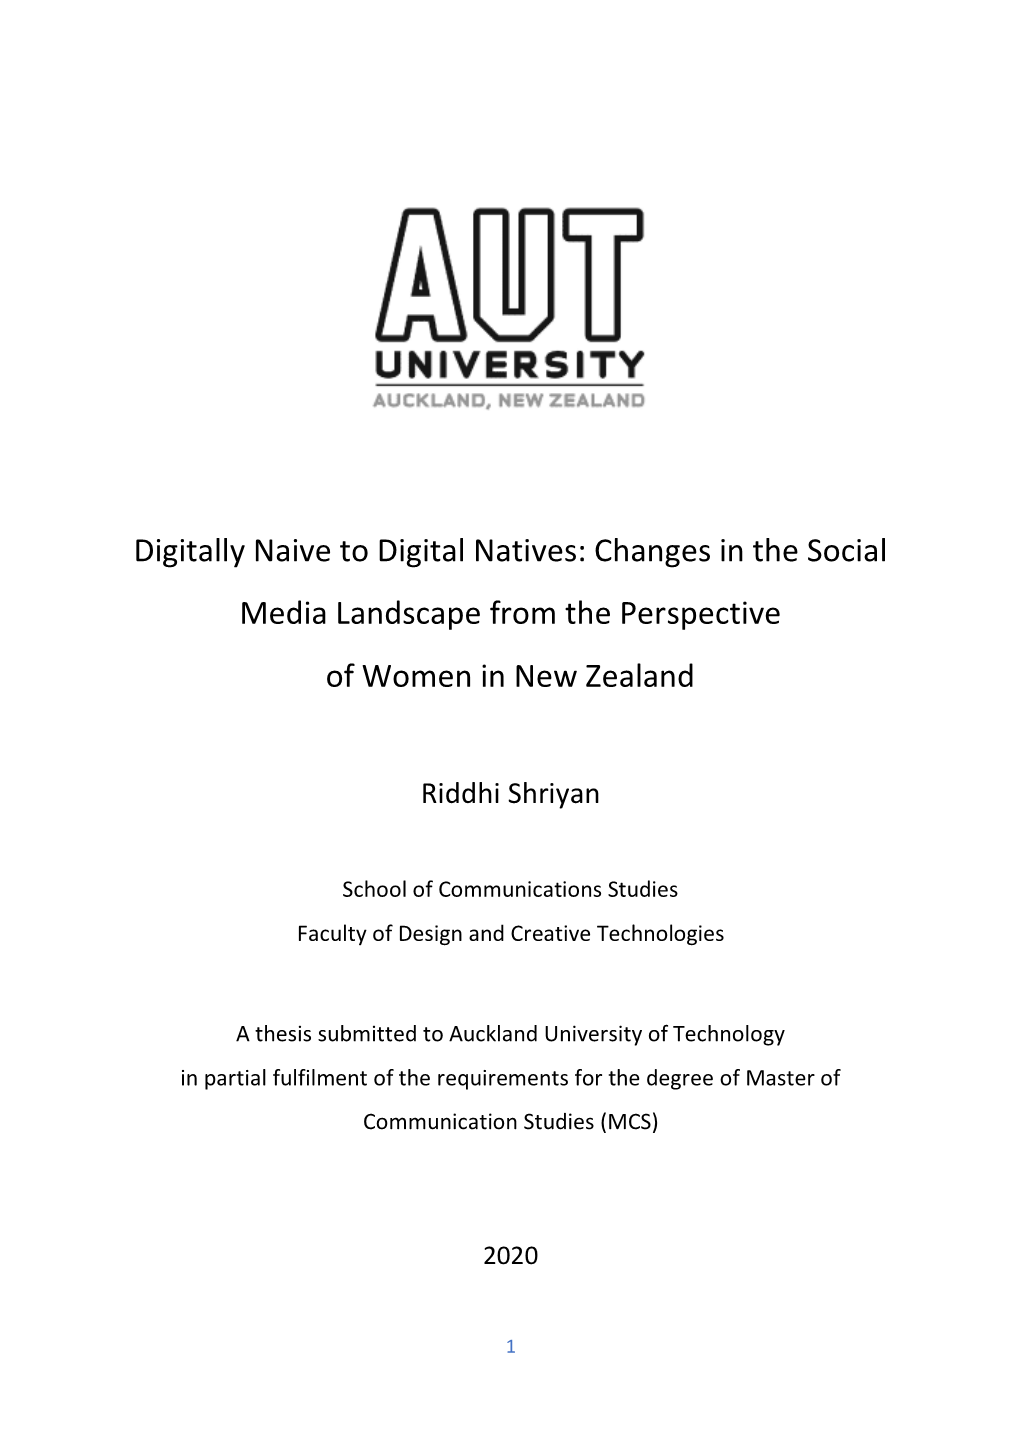 Digitally Naive to Digital Natives: Changes in the Social Media Landscape from the Perspective of Women in New Zealand